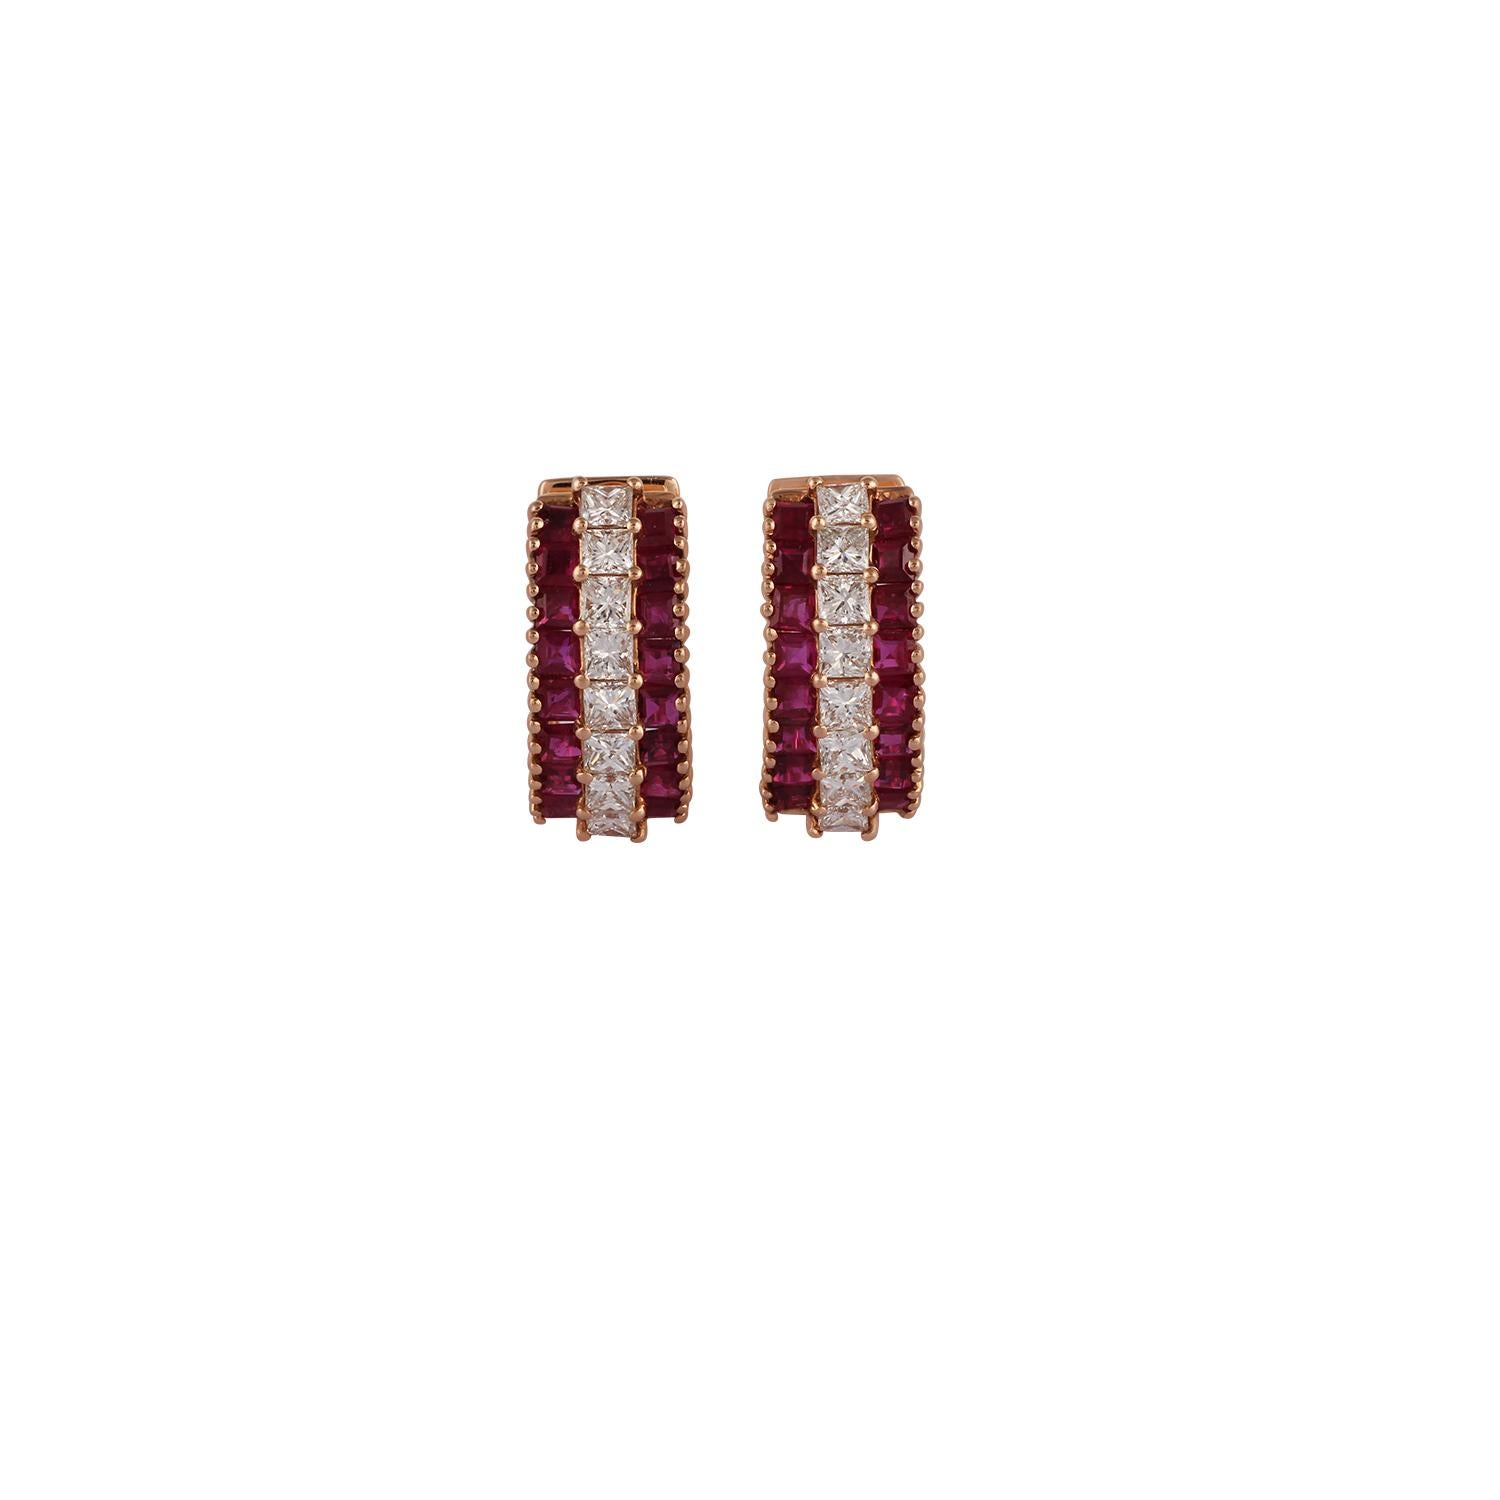 These are very elegant ruby & diamond hoop earrings studded in 18k rose gold features 32 pieces of square-shaped ruby weight 1.35 carats with 16 pieces of square-shaped diamonds weight 0.89 carats the entire earrings are made in 18k rose gold weight